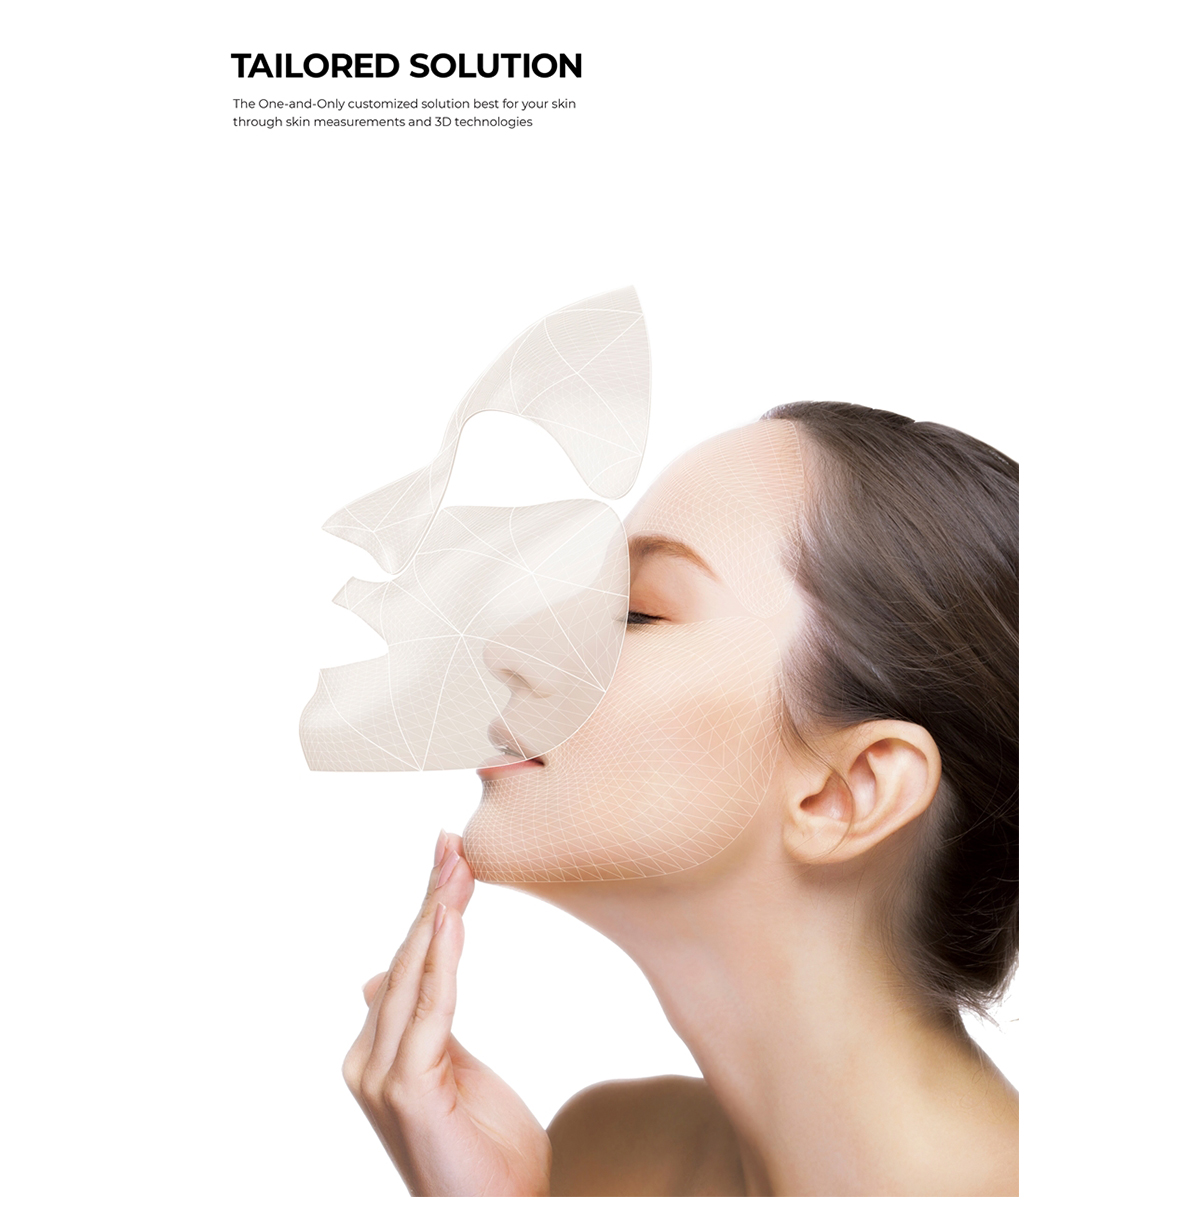 TAILORED SOLUTION The One-and-Only customized solution best for your skin through skin measurements and 3D technologies - 메인 이미지